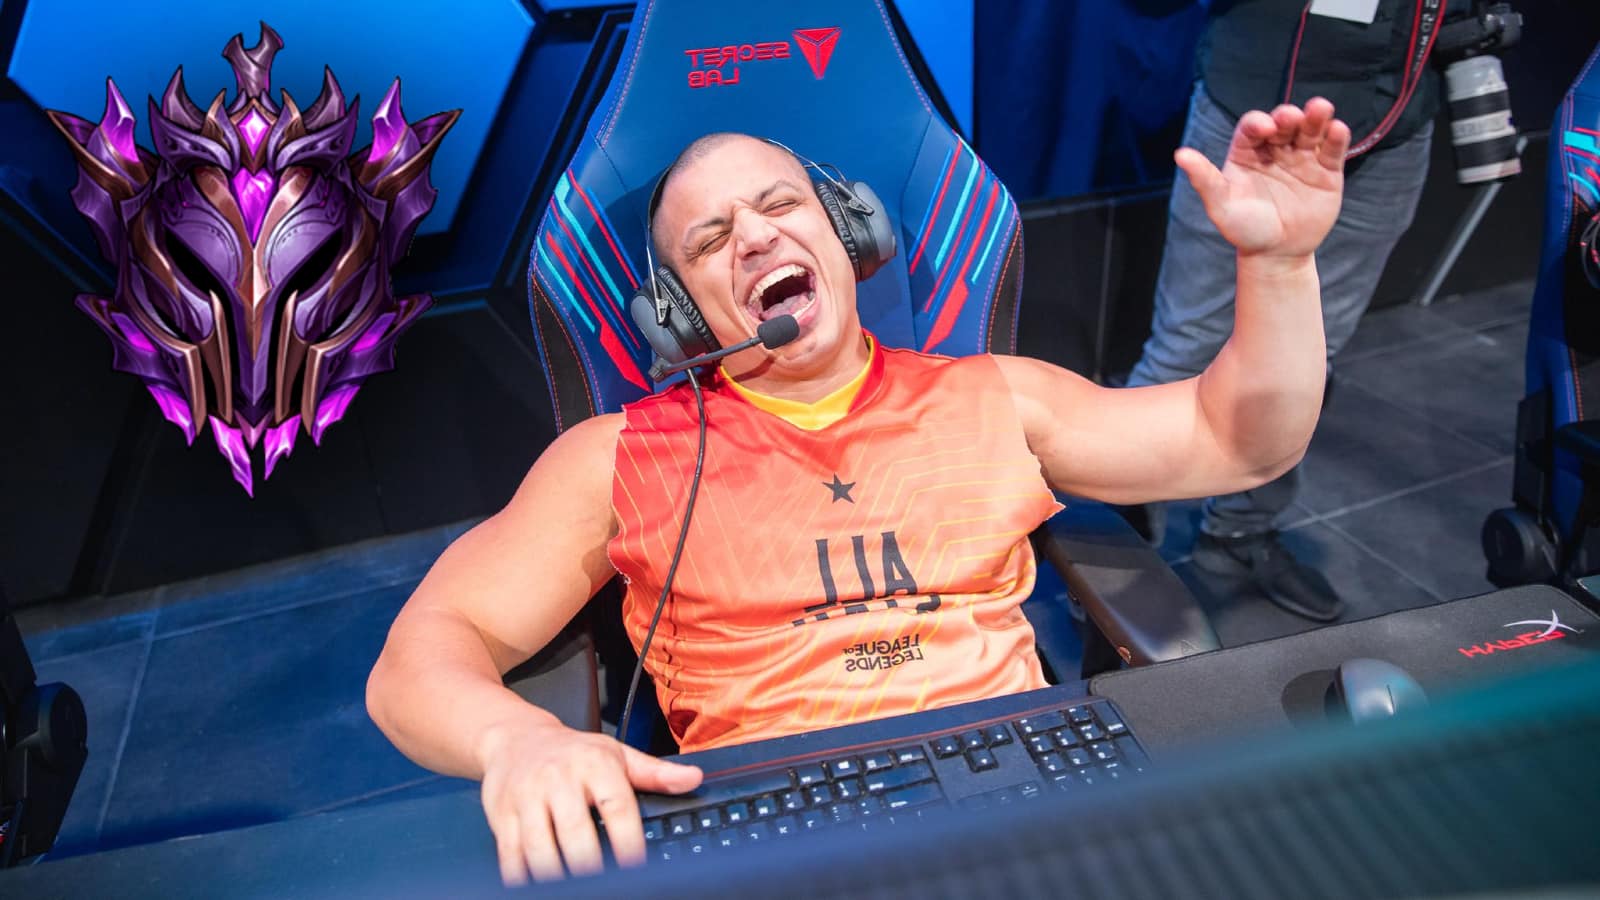 twitch streamer tyler 1 at an all stars league of legends lol event punches the air with master rank icon